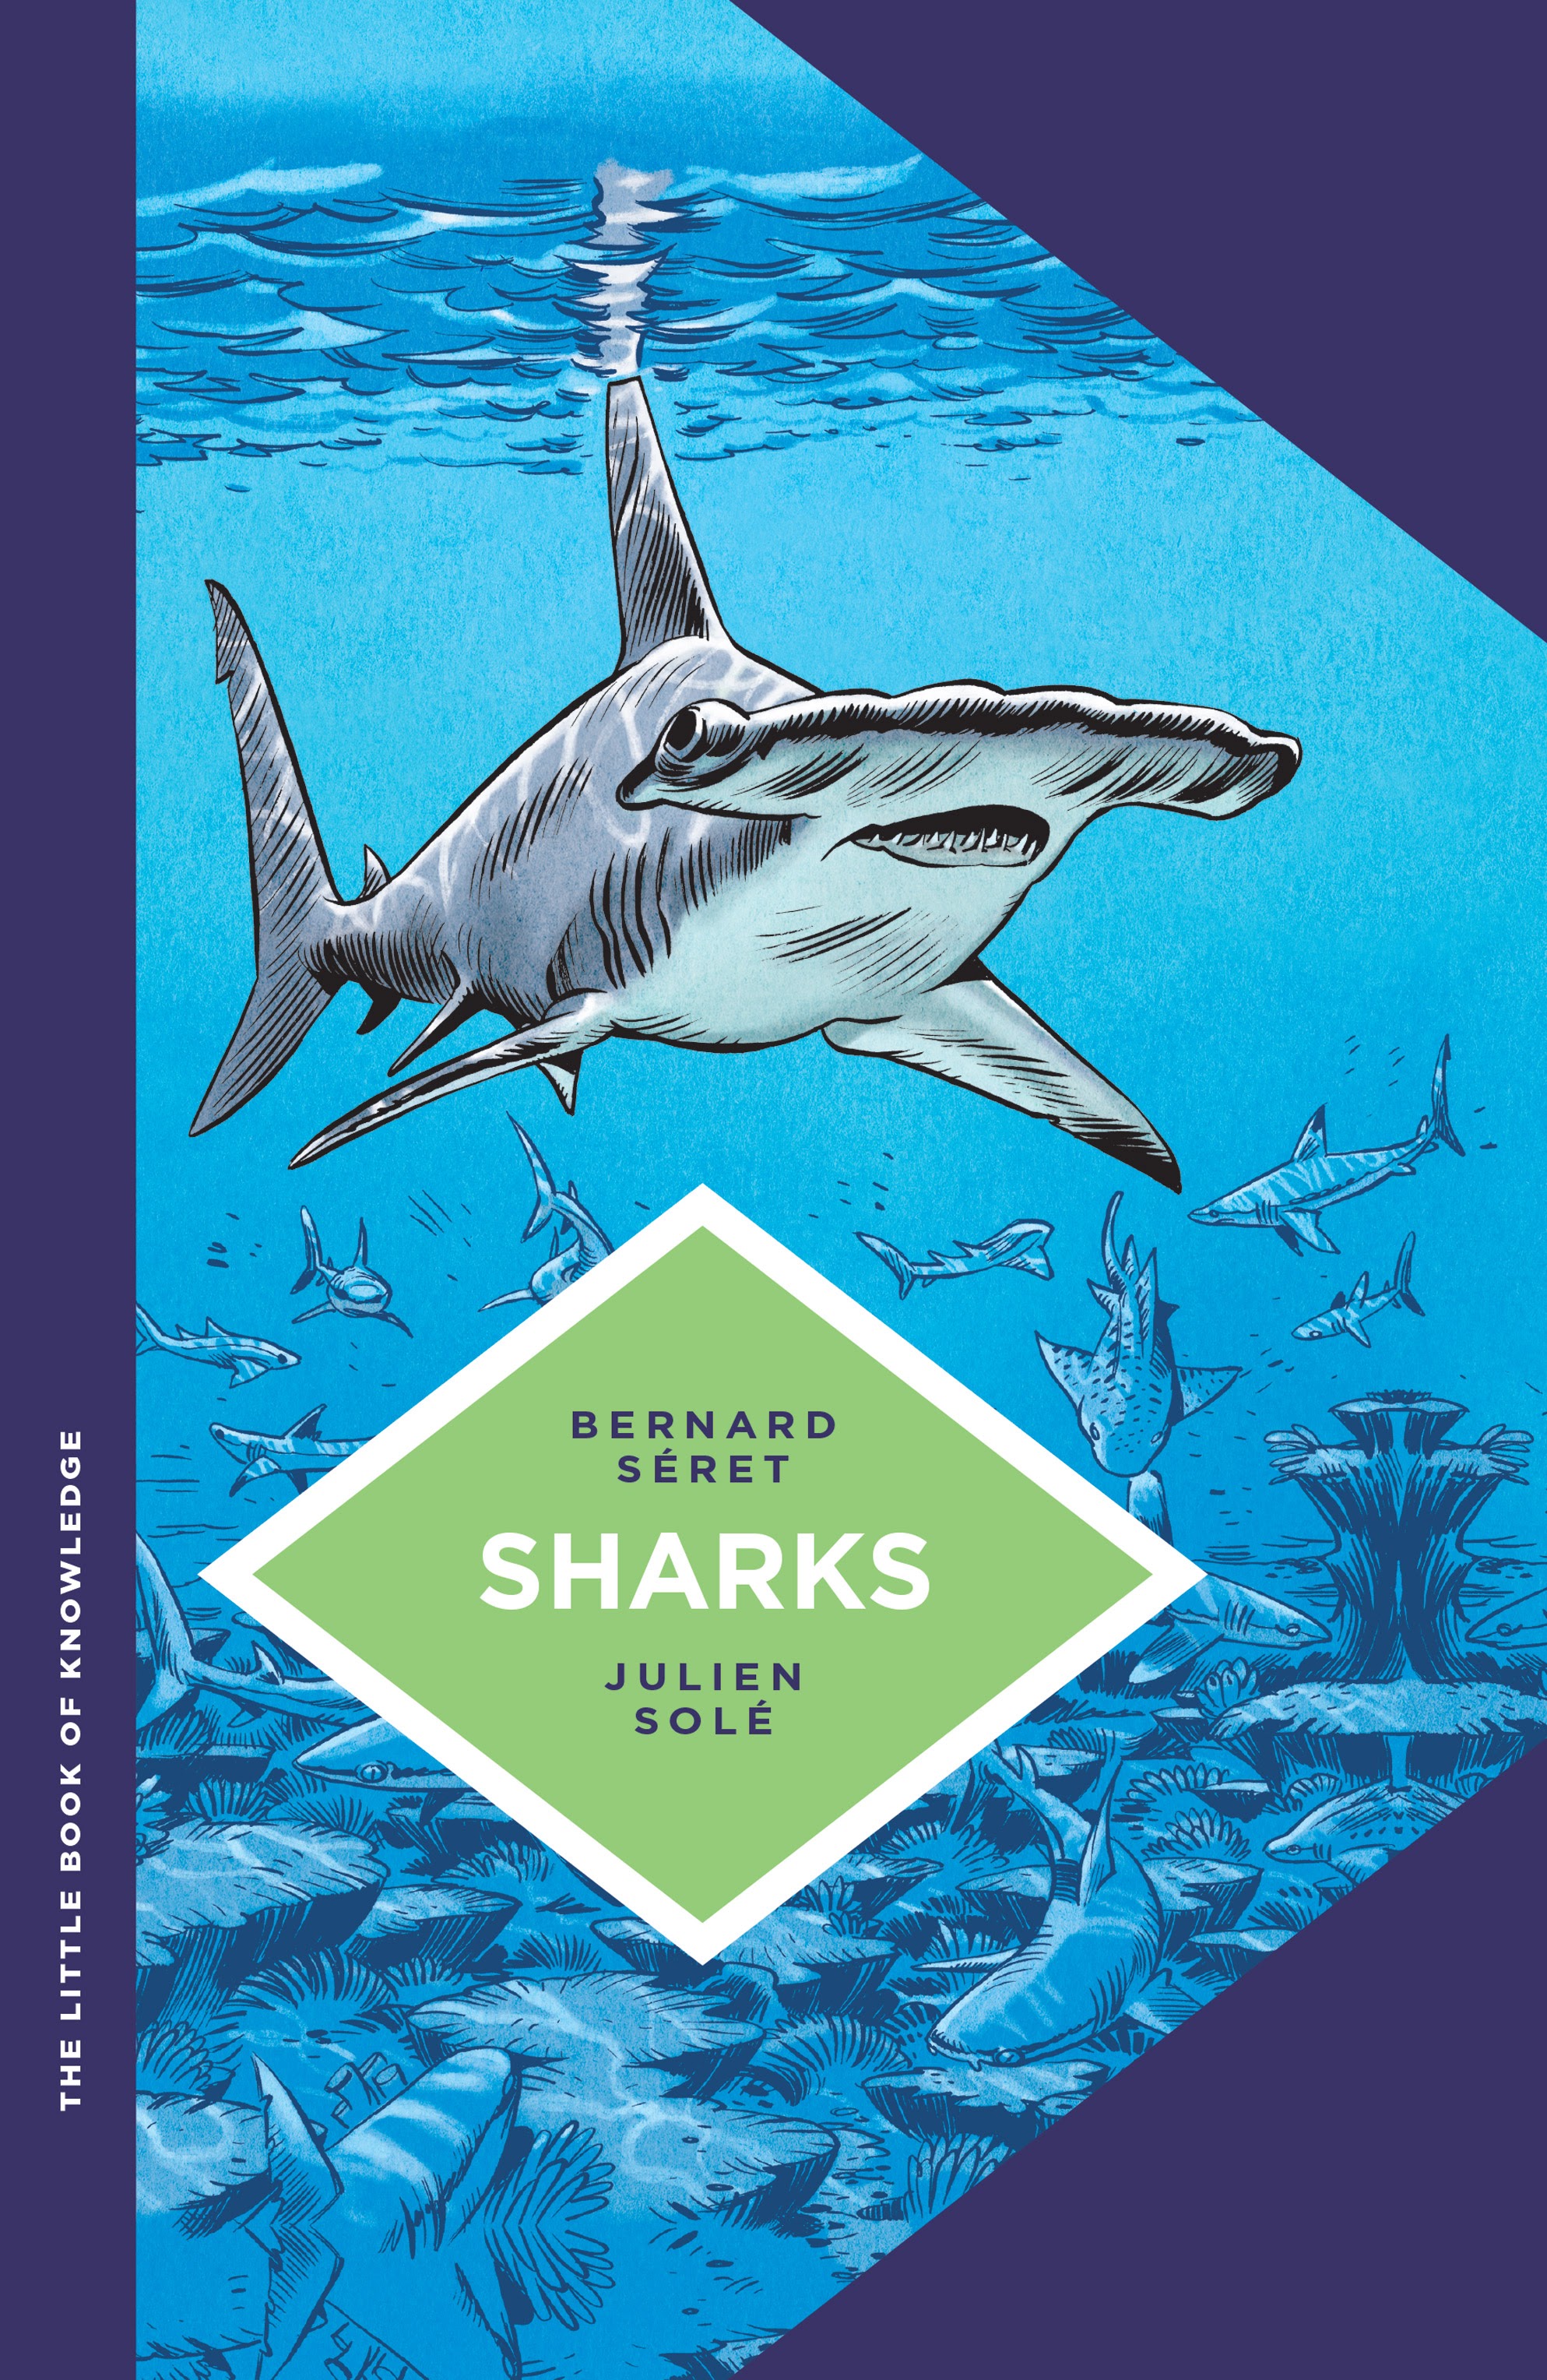 Read online Little Book of Knowledge: Sharks comic -  Issue # TPB - 1